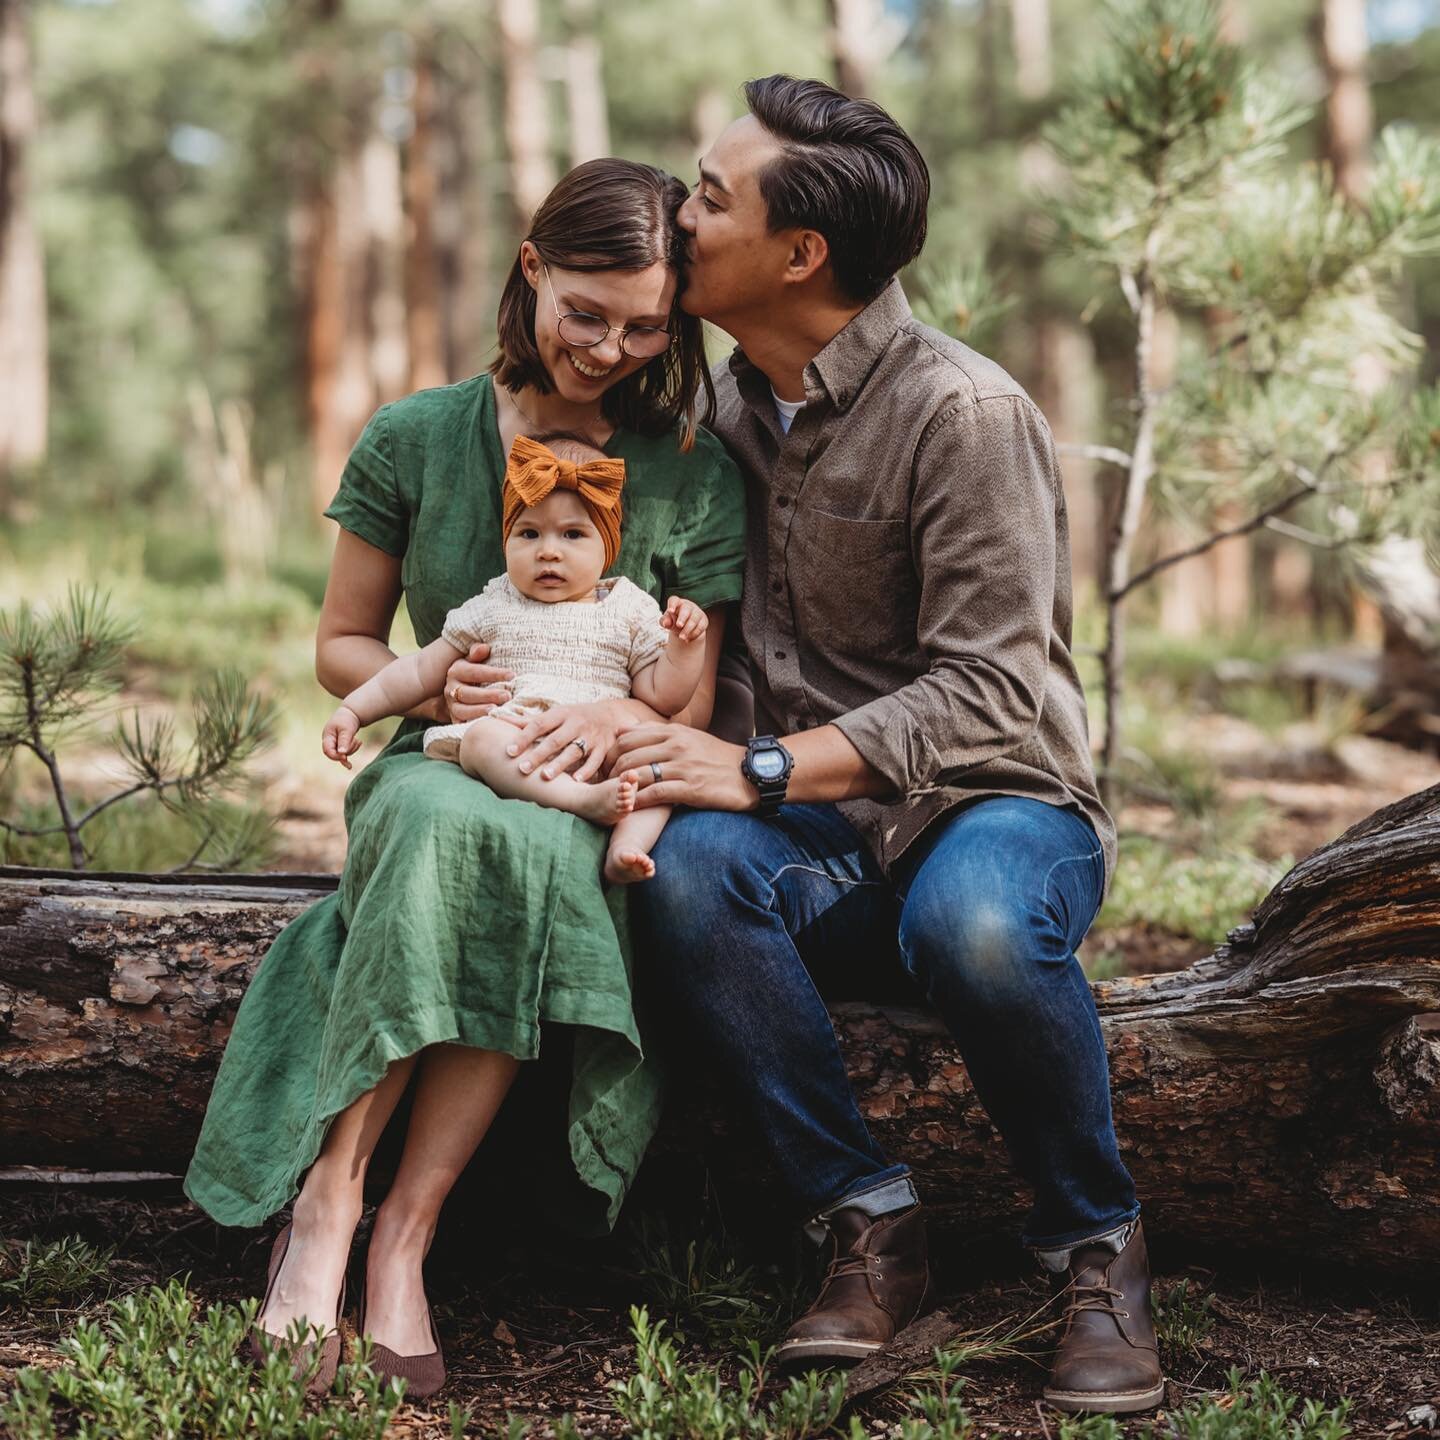 Check out this darling little family in the forest! 🌲🌲🌲
.
.
@hallie_beth